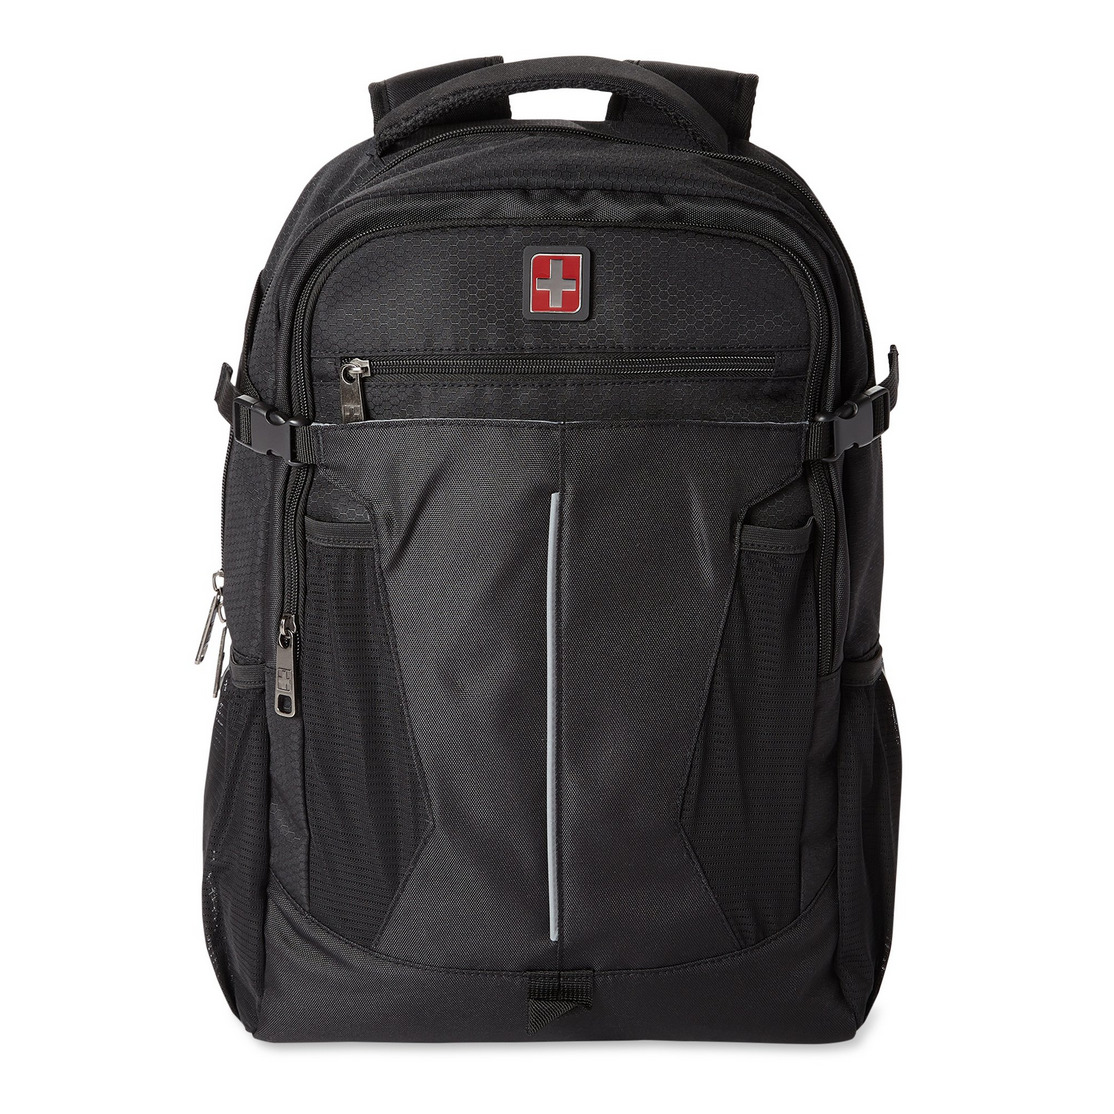 Swiss Tech Banded Backpack for School/Work